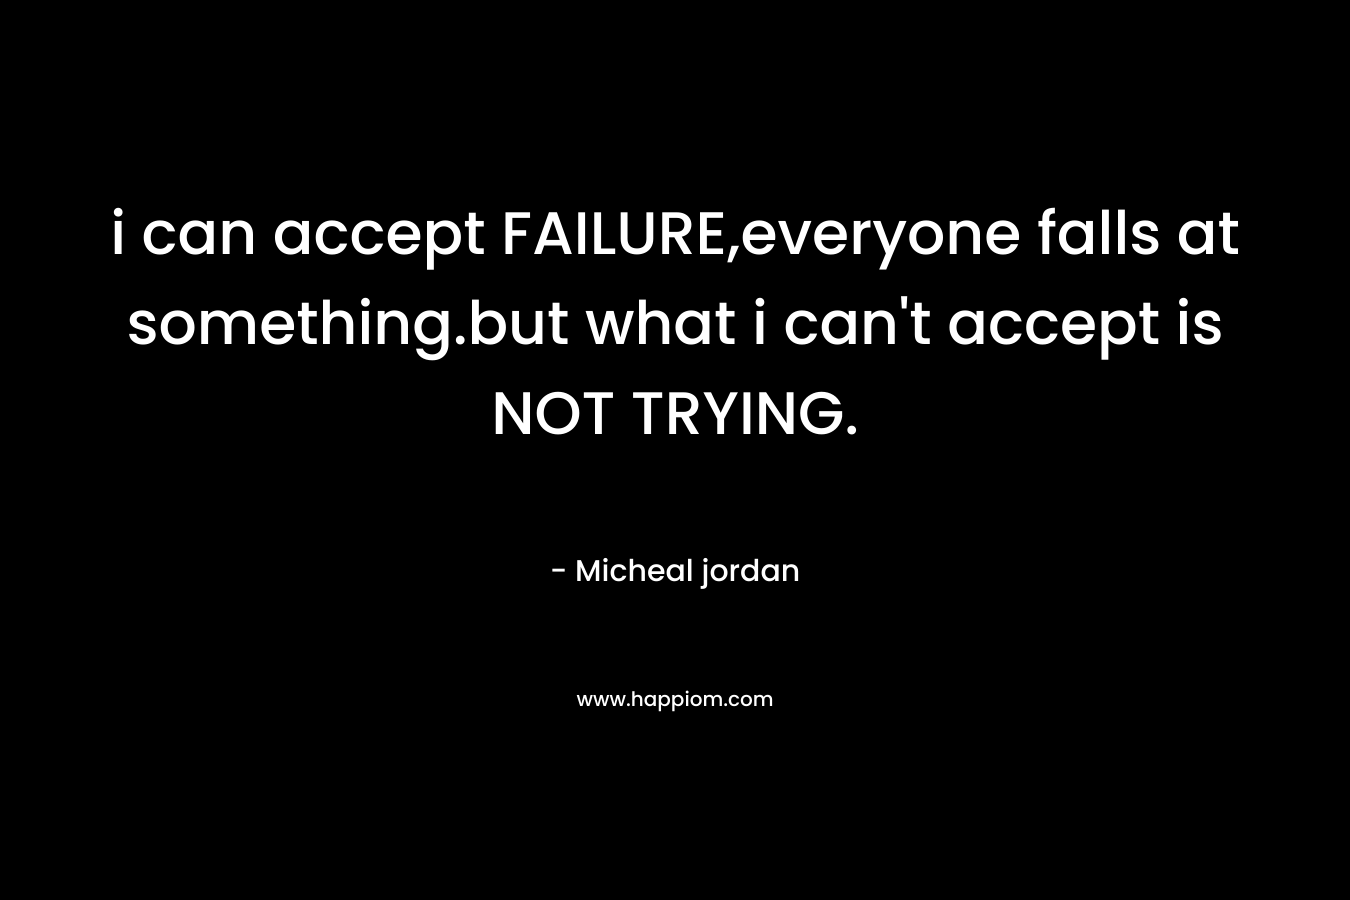 i can accept FAILURE,everyone falls at something.but what i can't accept is NOT TRYING.